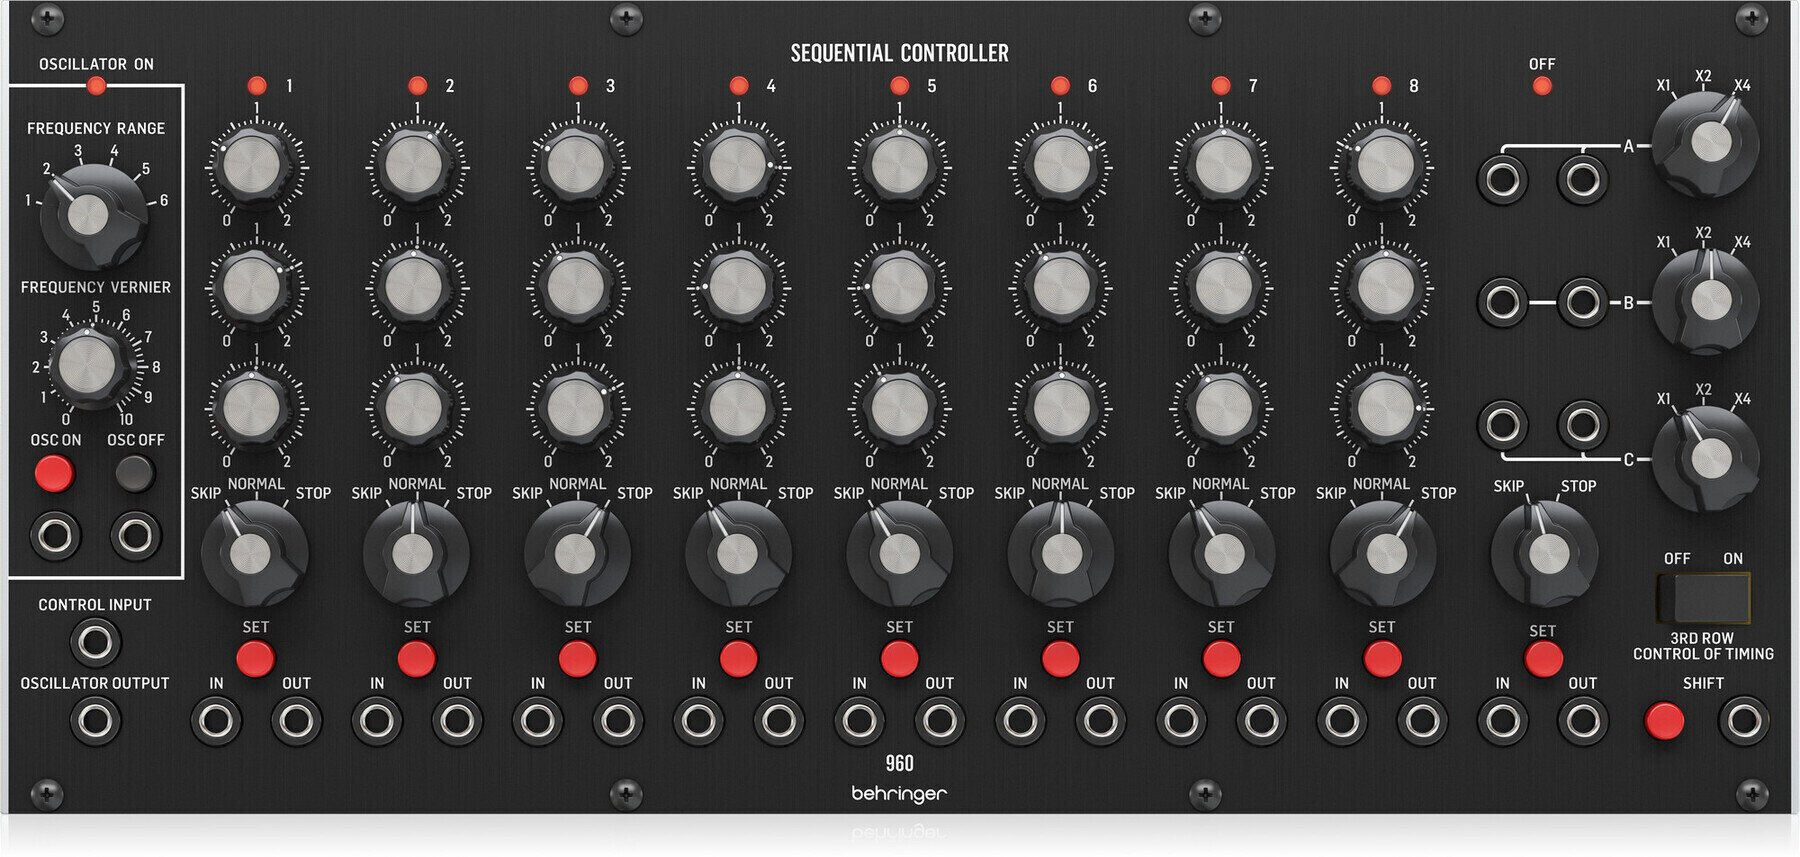 System modułowy Behringer 960 Sequential Controller